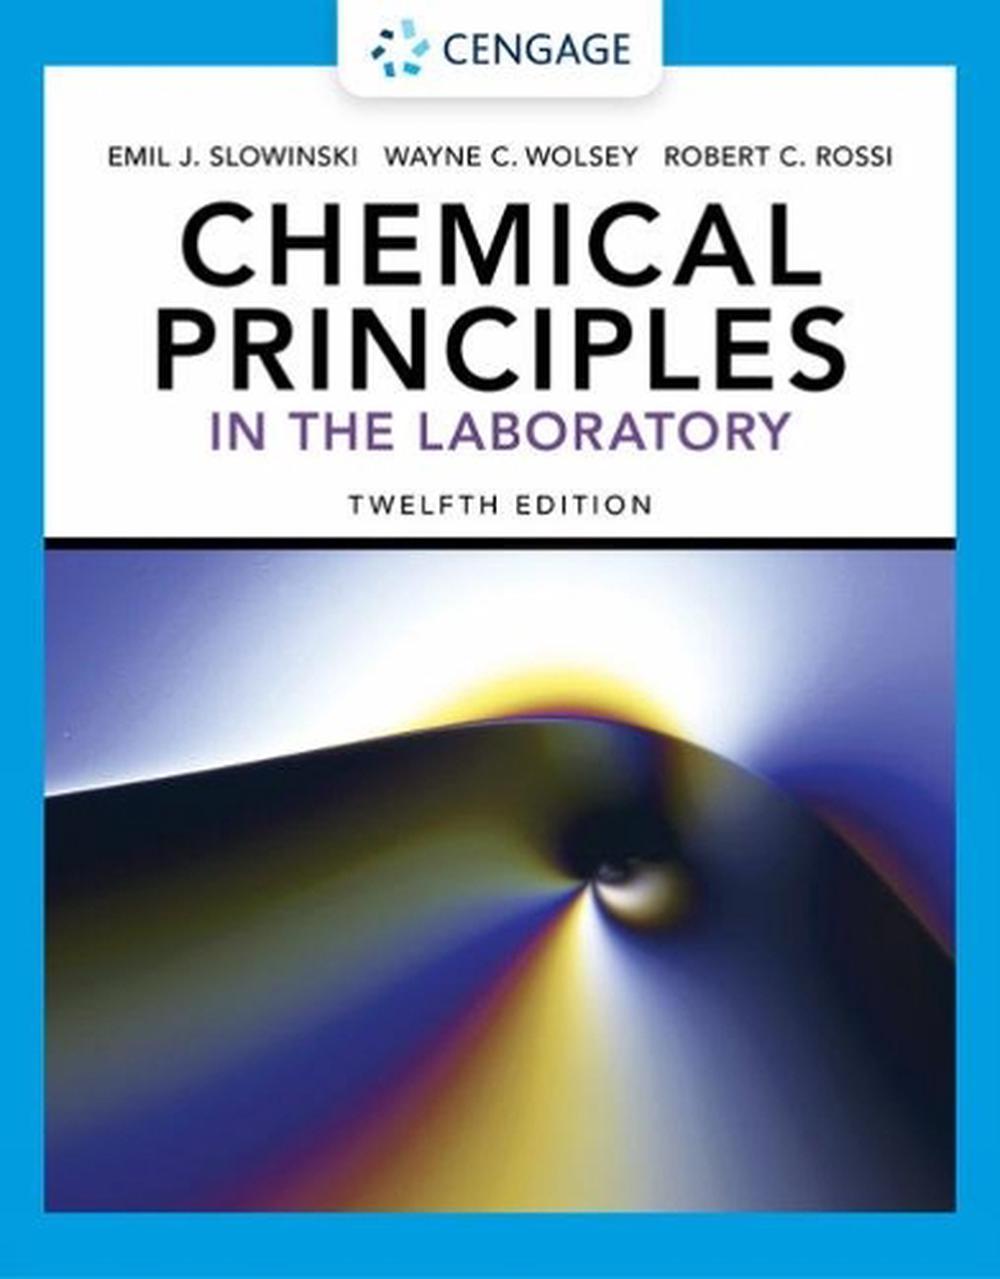 Chemical Principles in the Laboratory by Robert Rossi (English) Spiral